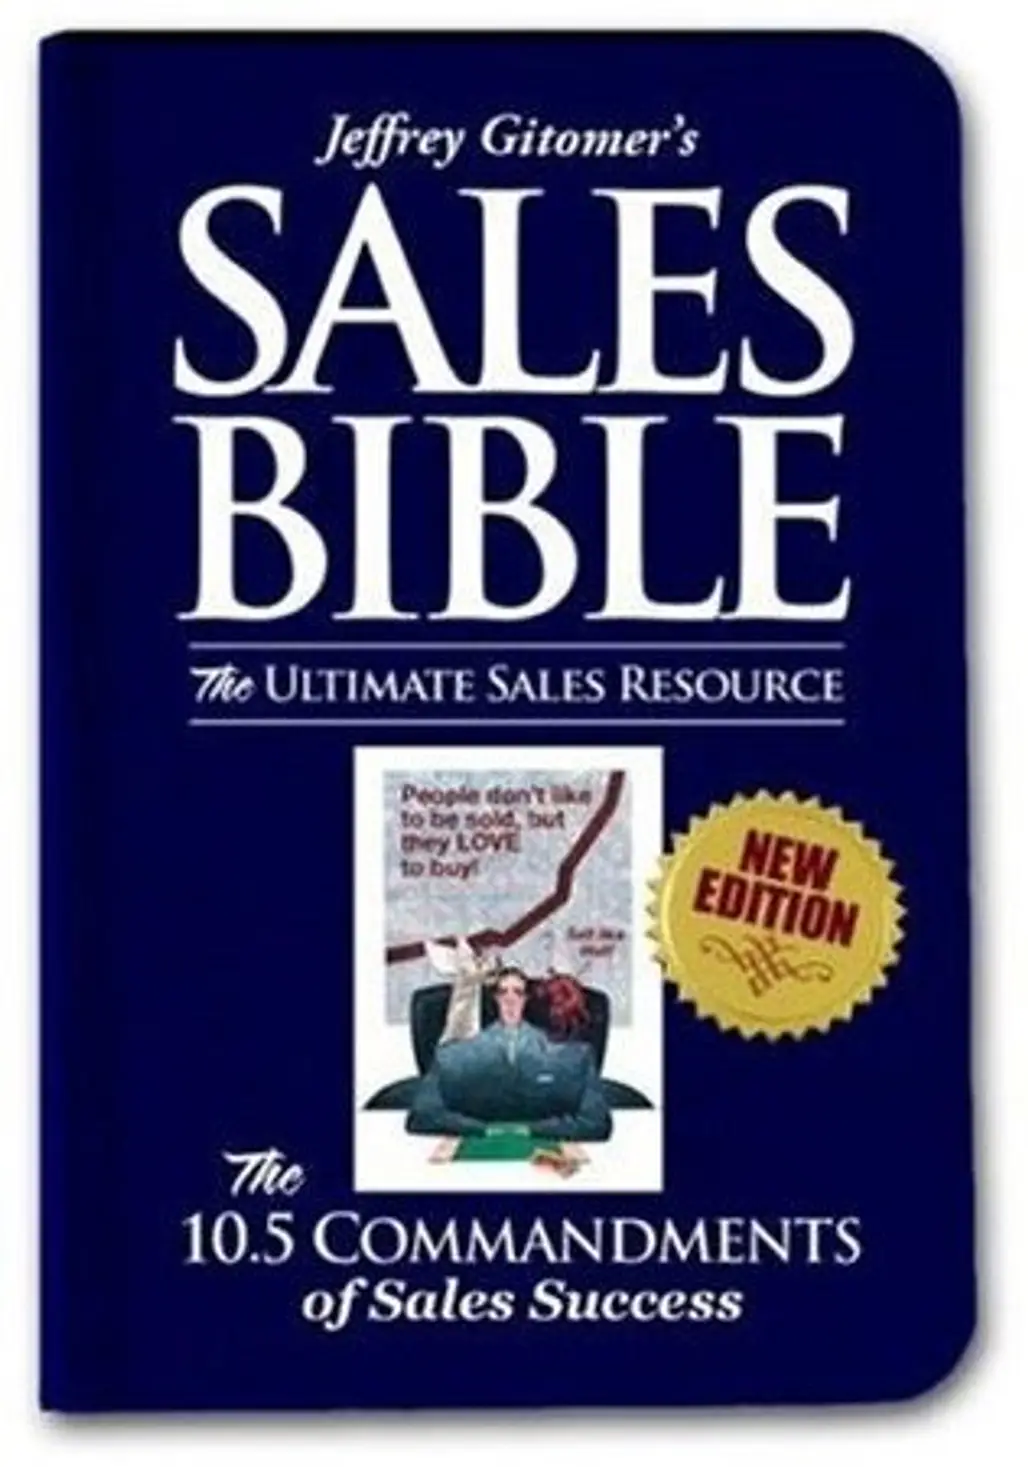 The Sales Bible: the Ultimate Sales Resource ...